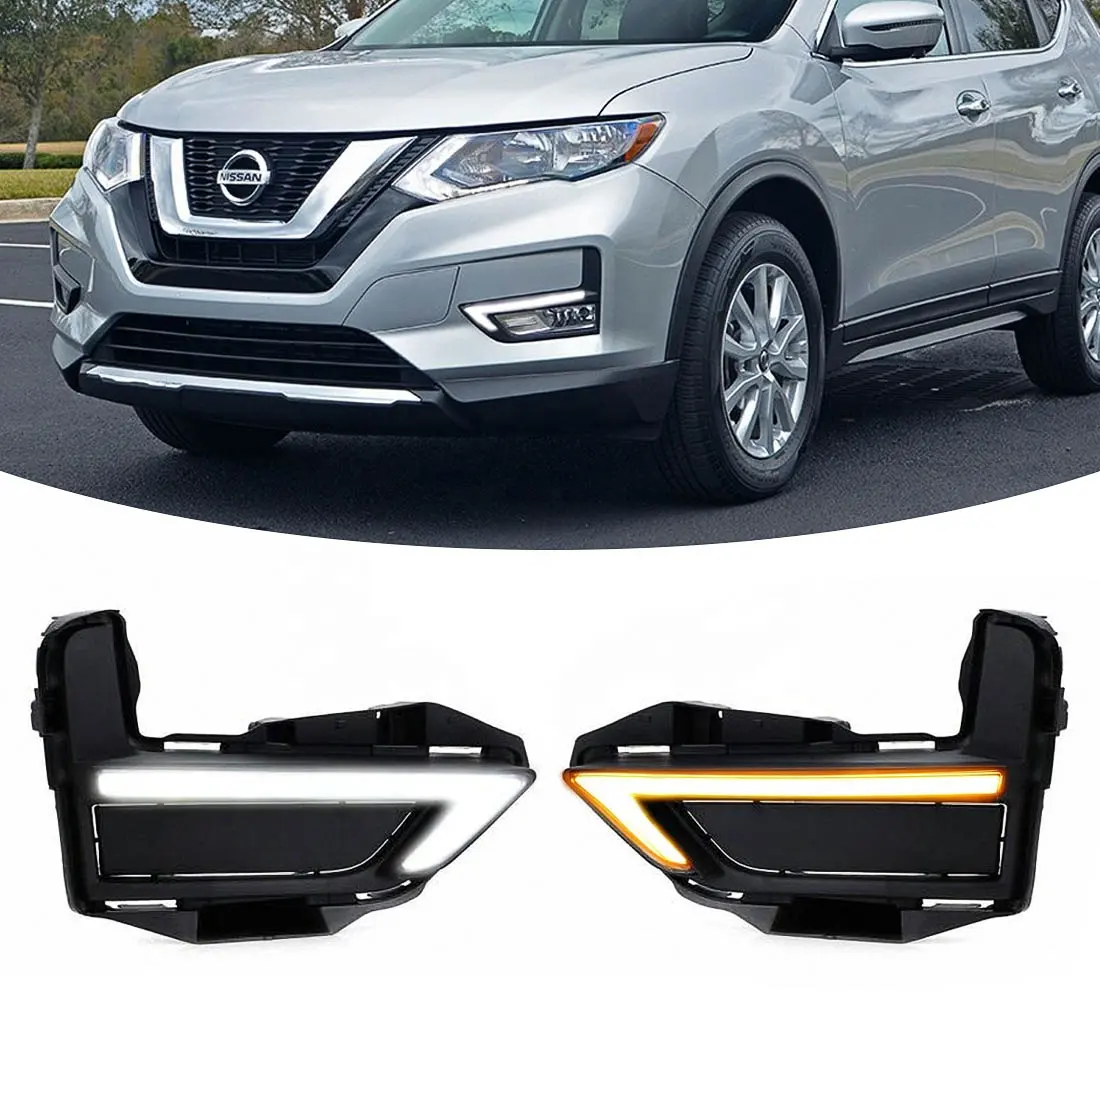 Car Headlights LED Fog Lights DRL Lamps Daytime Running Lights for Nissan X-trail Rogue 2017 2018 2019 Auto Accessories